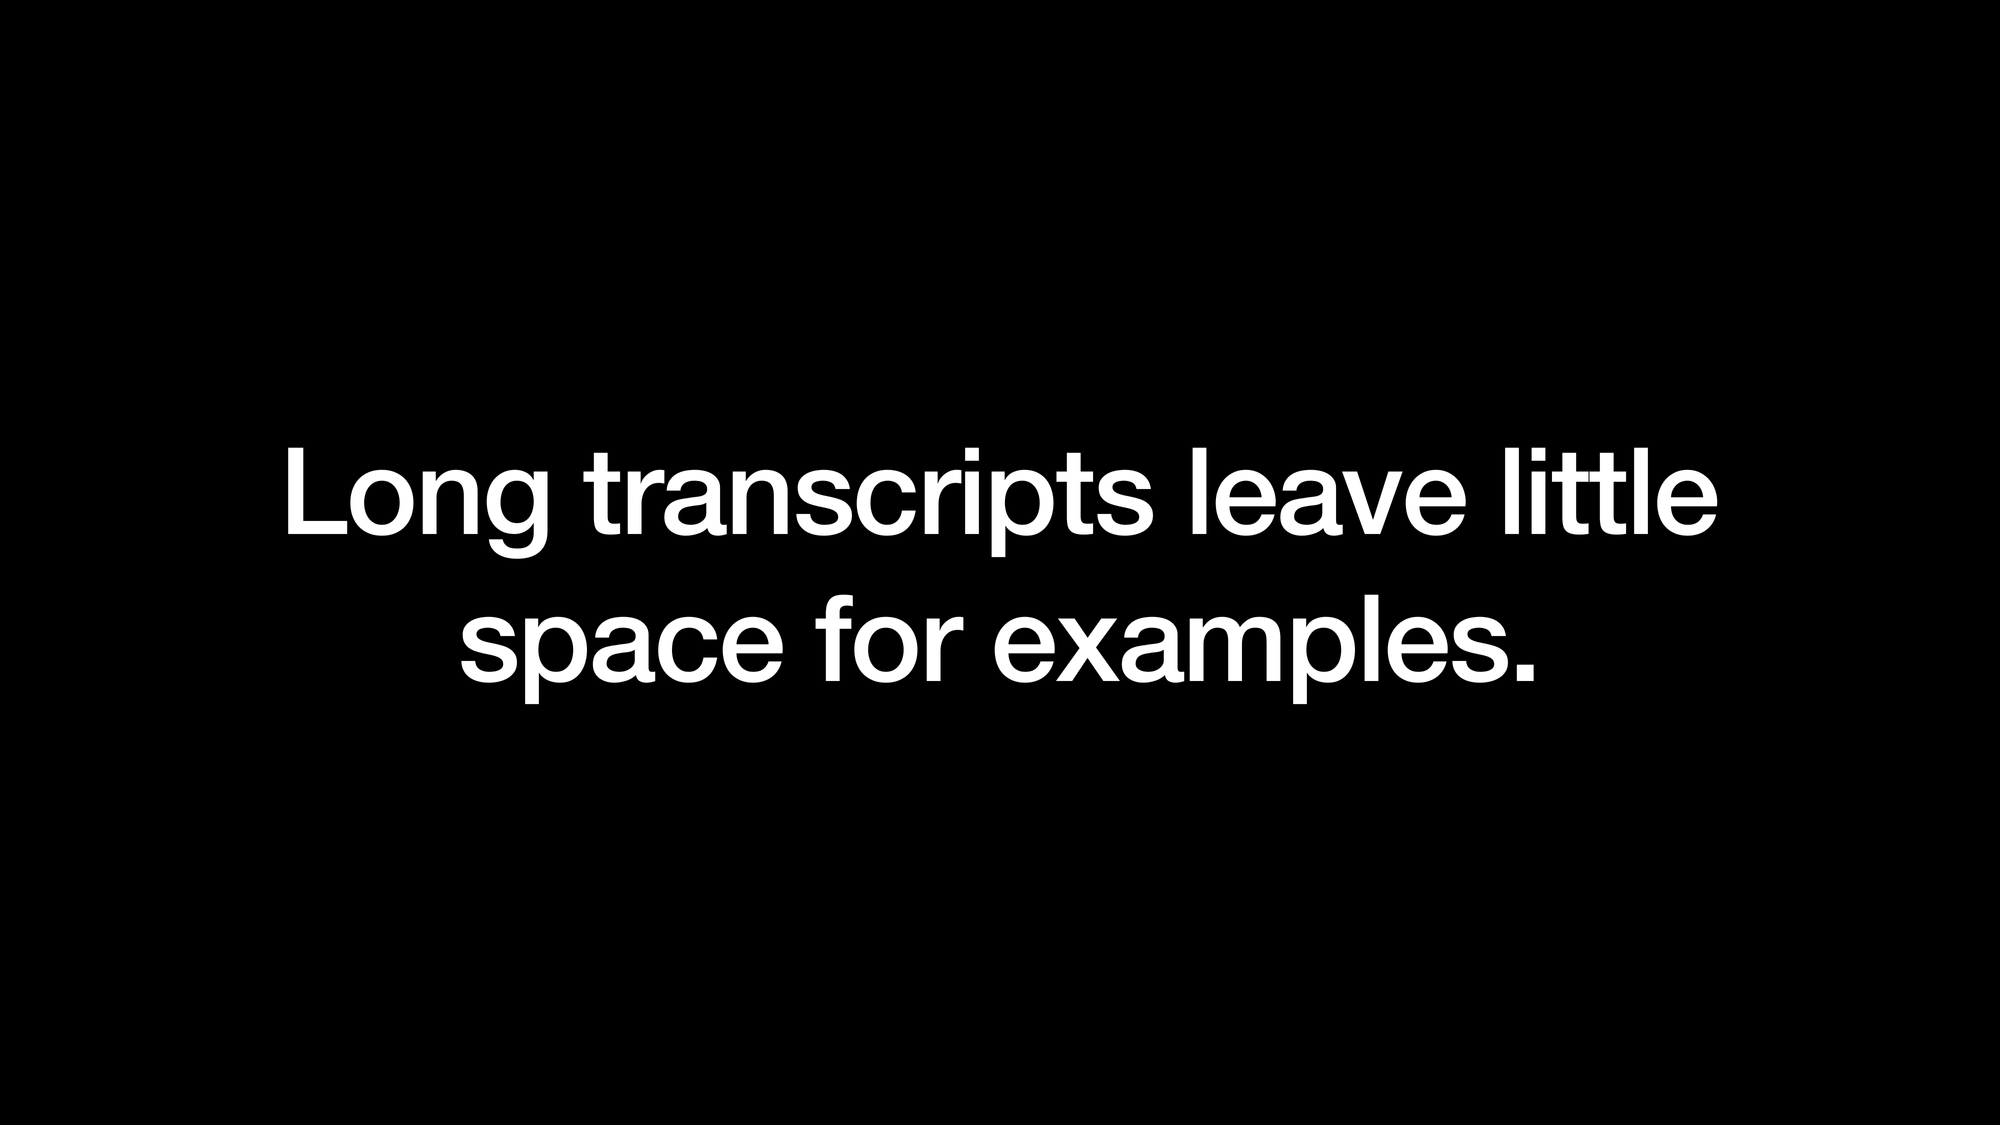 Long transcripts leave little space for examples.